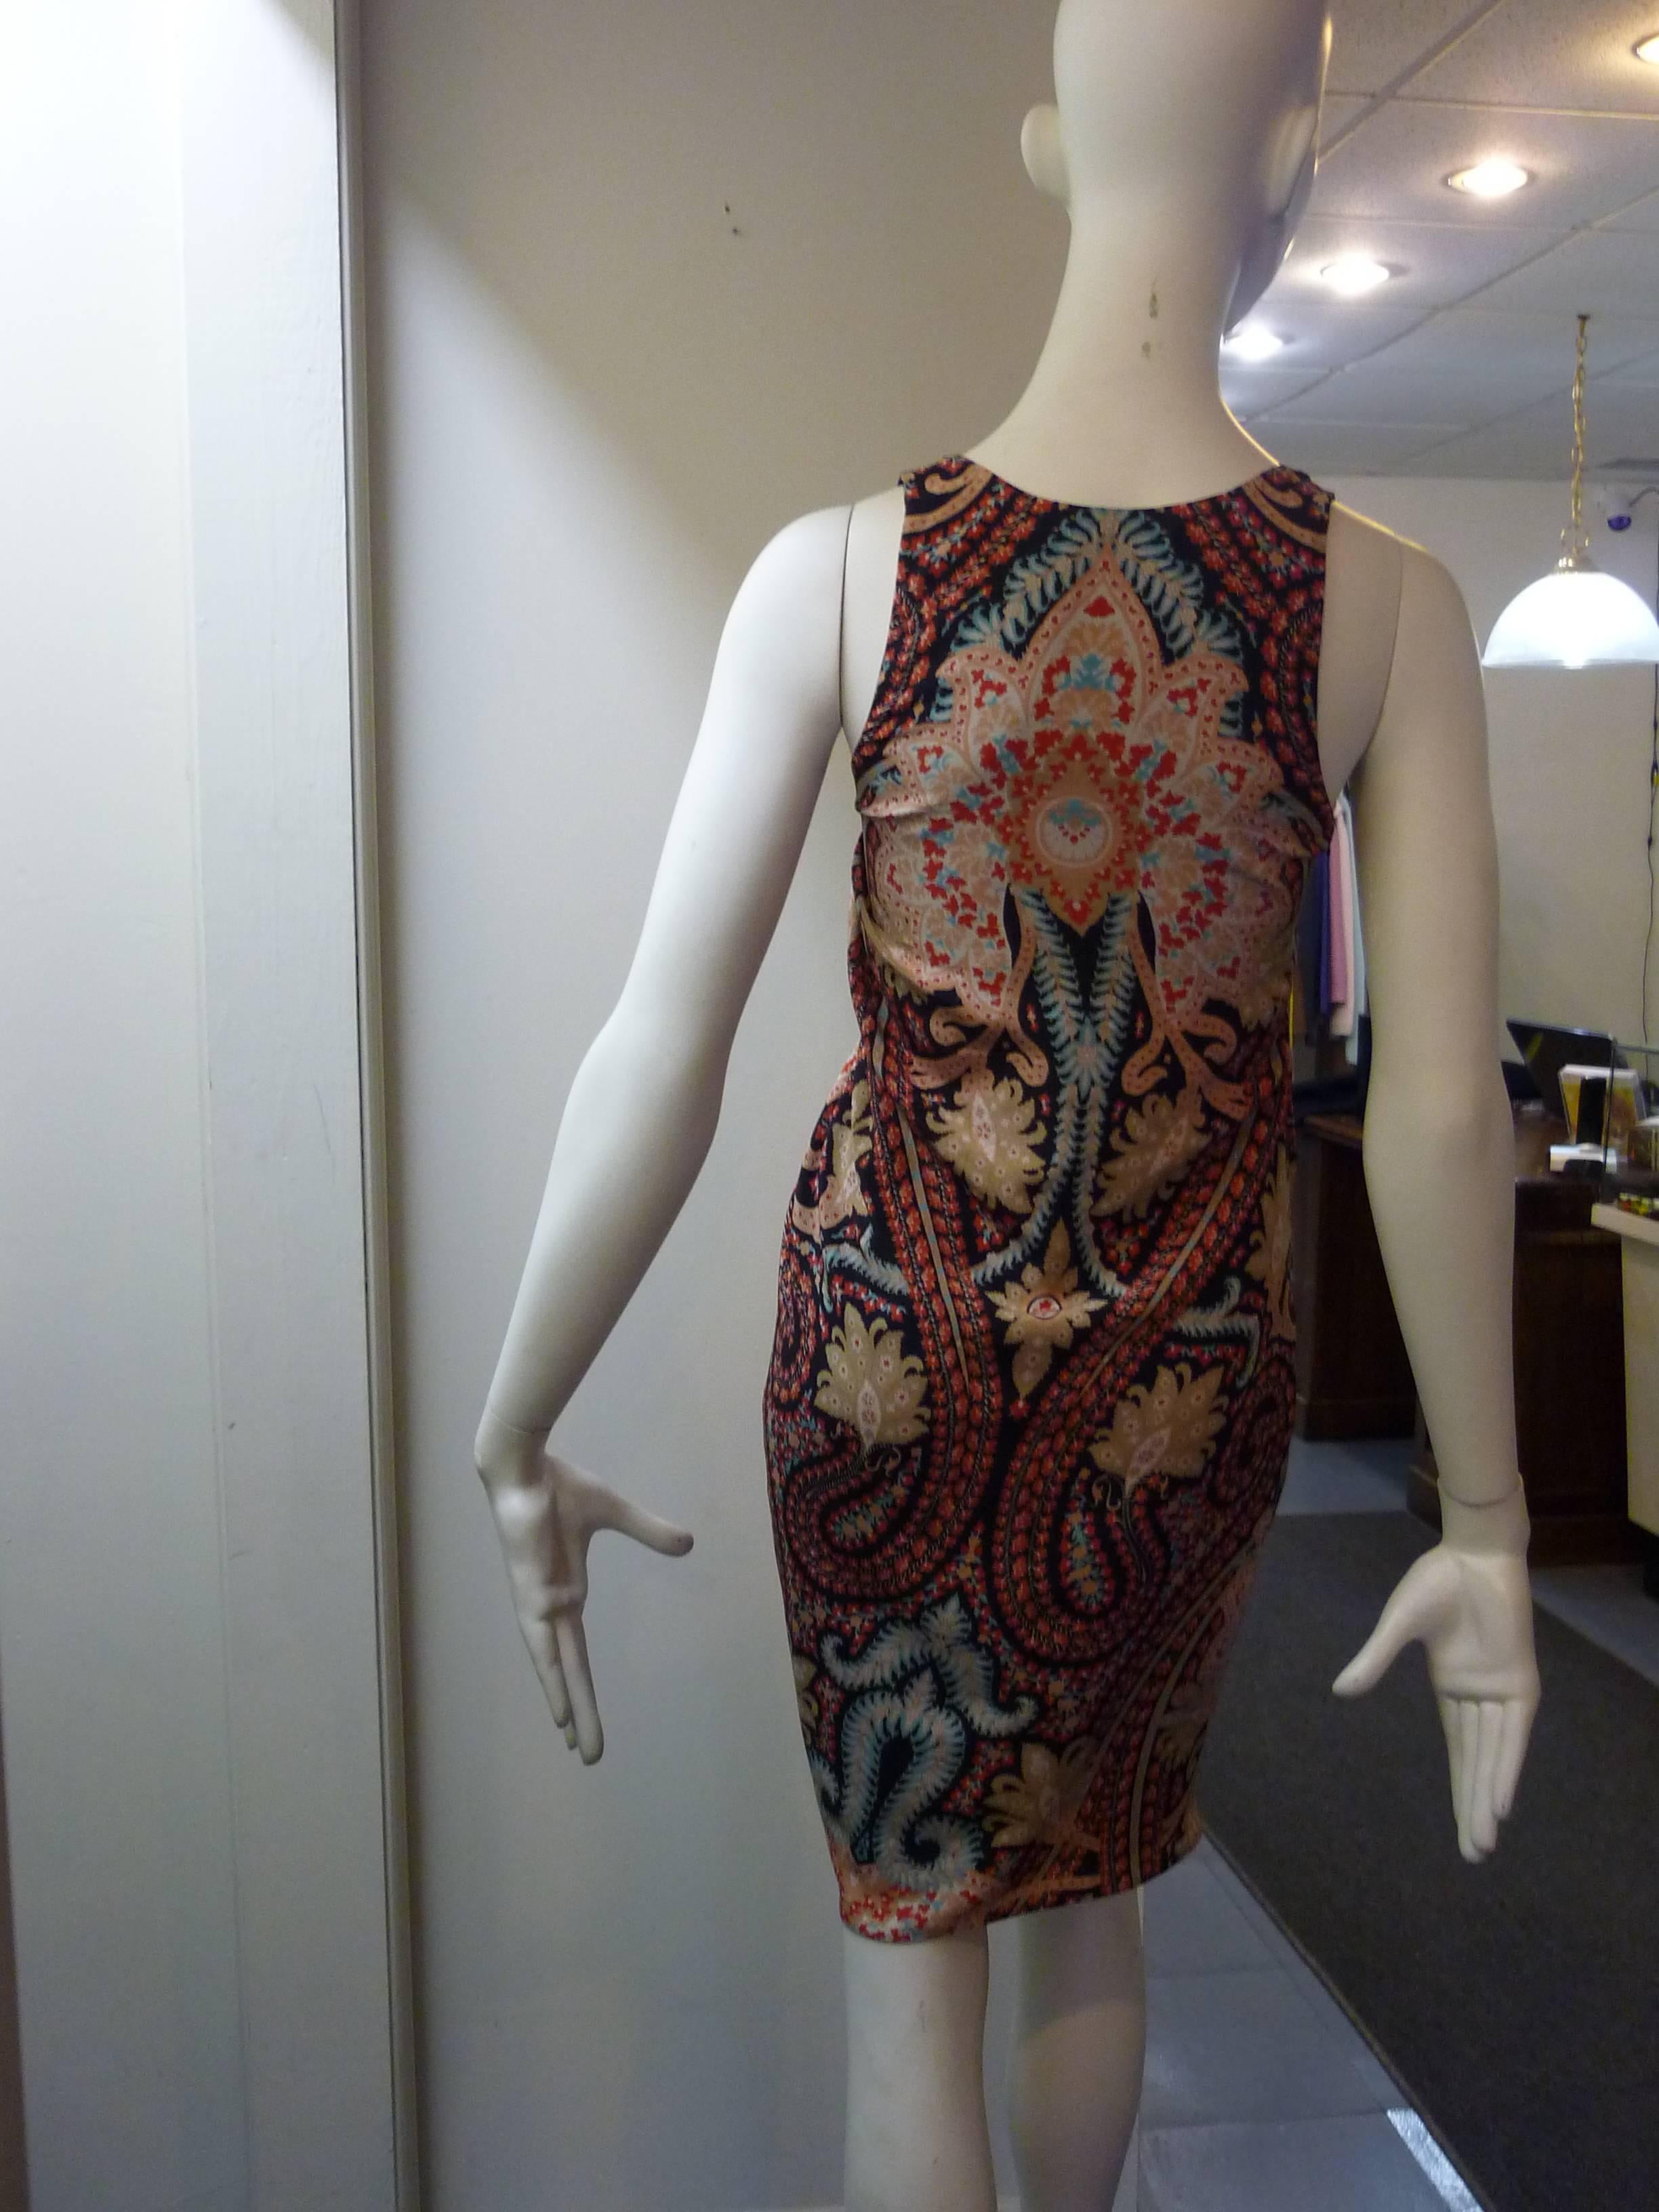 This multicolored paisley print crepe de chine silk dress has a scoop neck and slight racer back. There is an asymmetrical pleated twist detail at the waist, and closure is a side zipper. The lining is also silk.